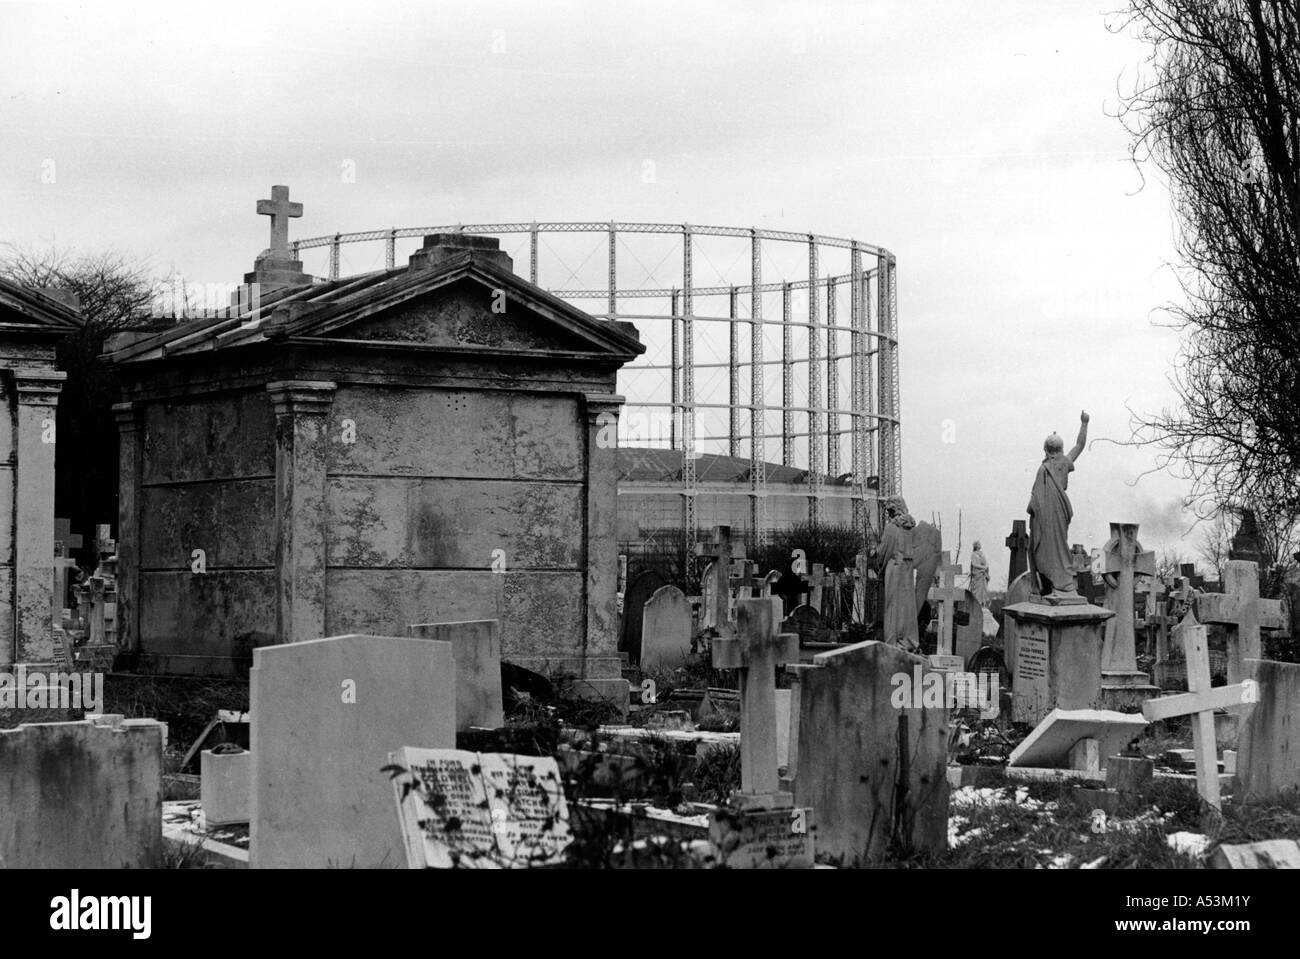 Painet ha1350 150 black and white contrasts kensal green cemetary london united kingdom country developing nation less Stock Photo